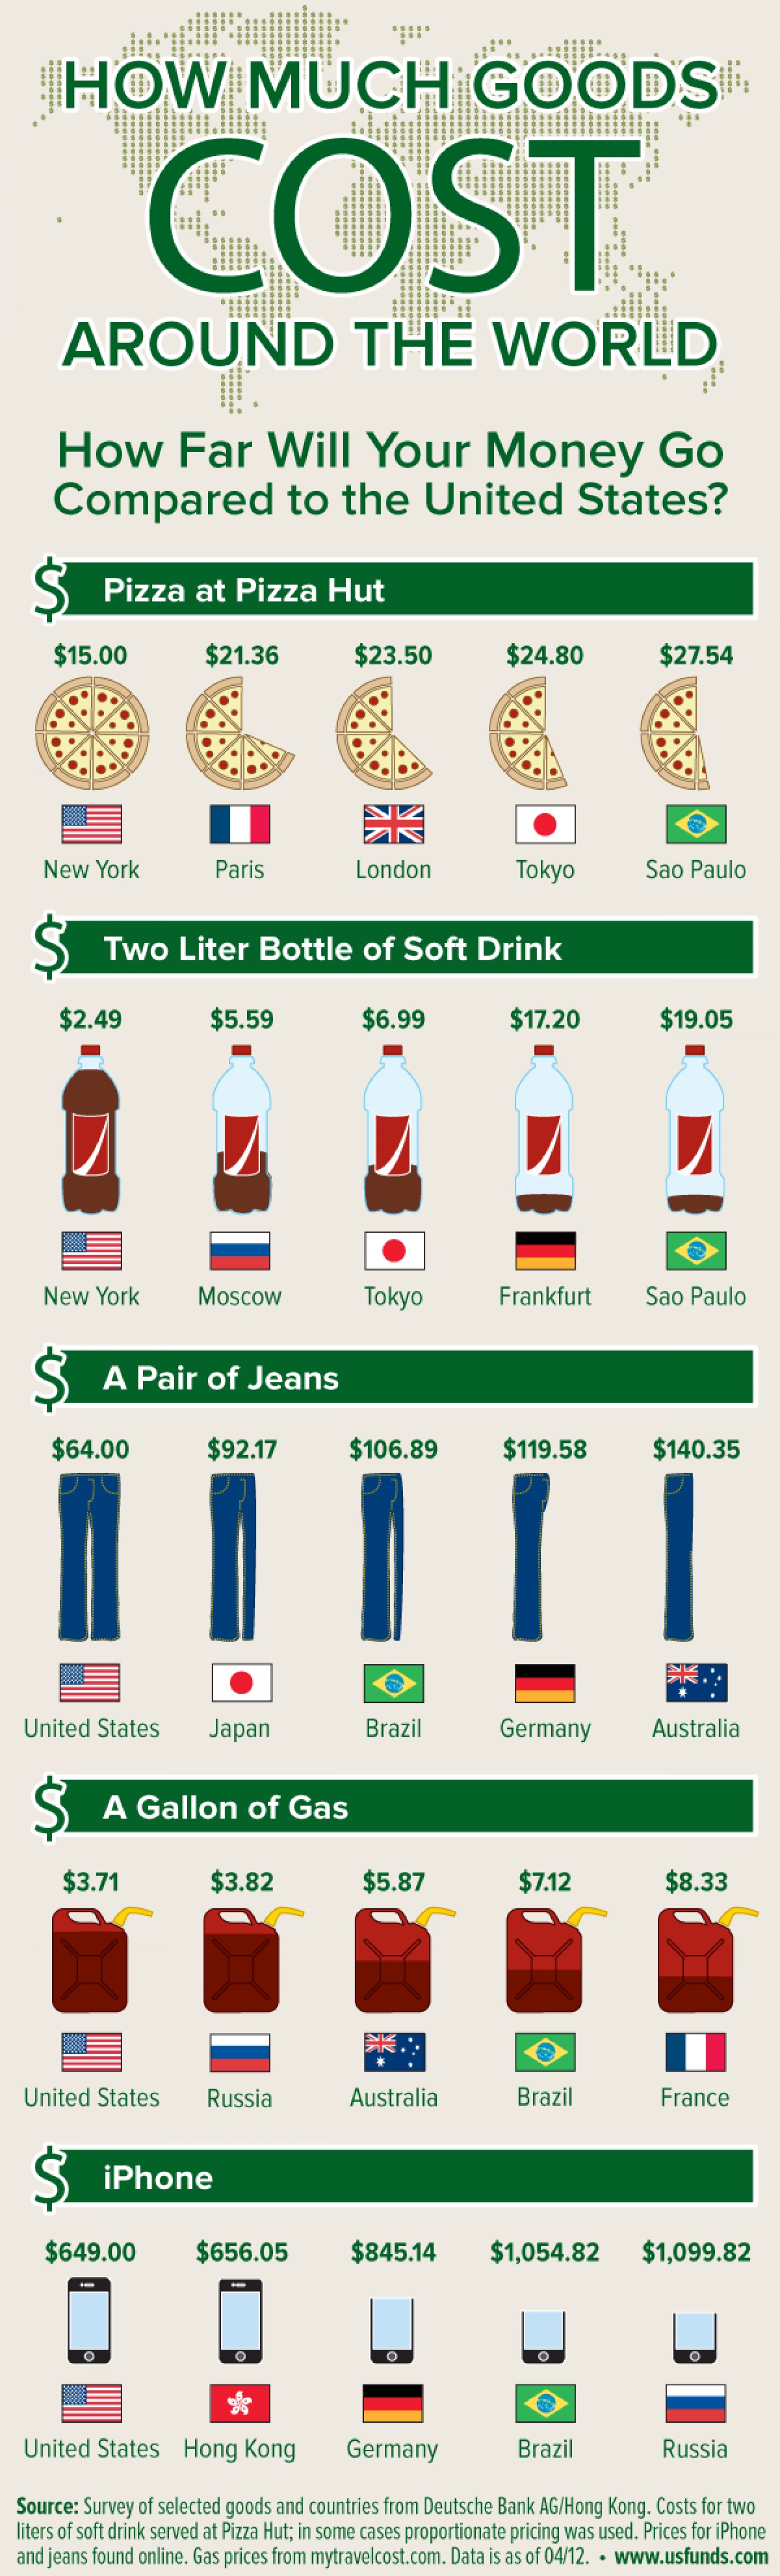 How much goods cost around the world